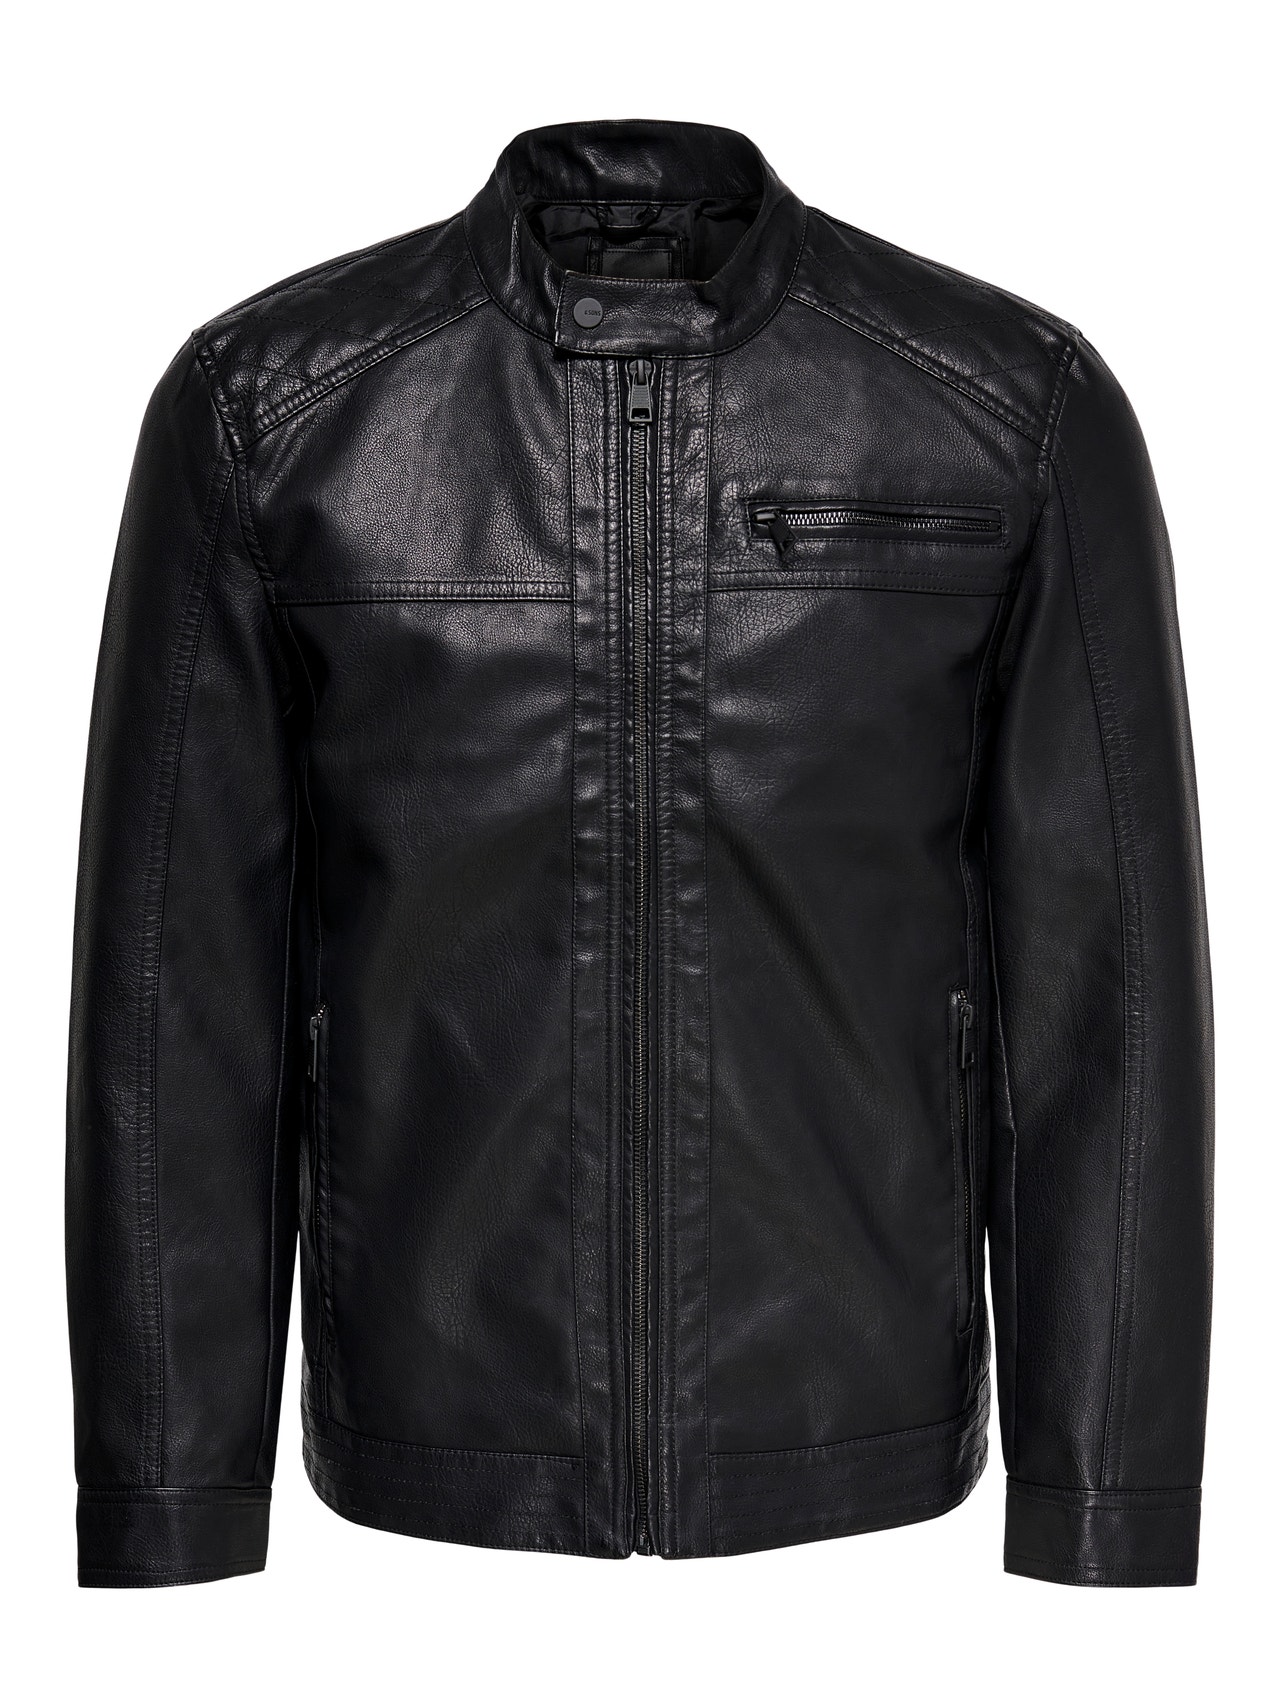 ONLY & SONS Jacket -Black - 22011975